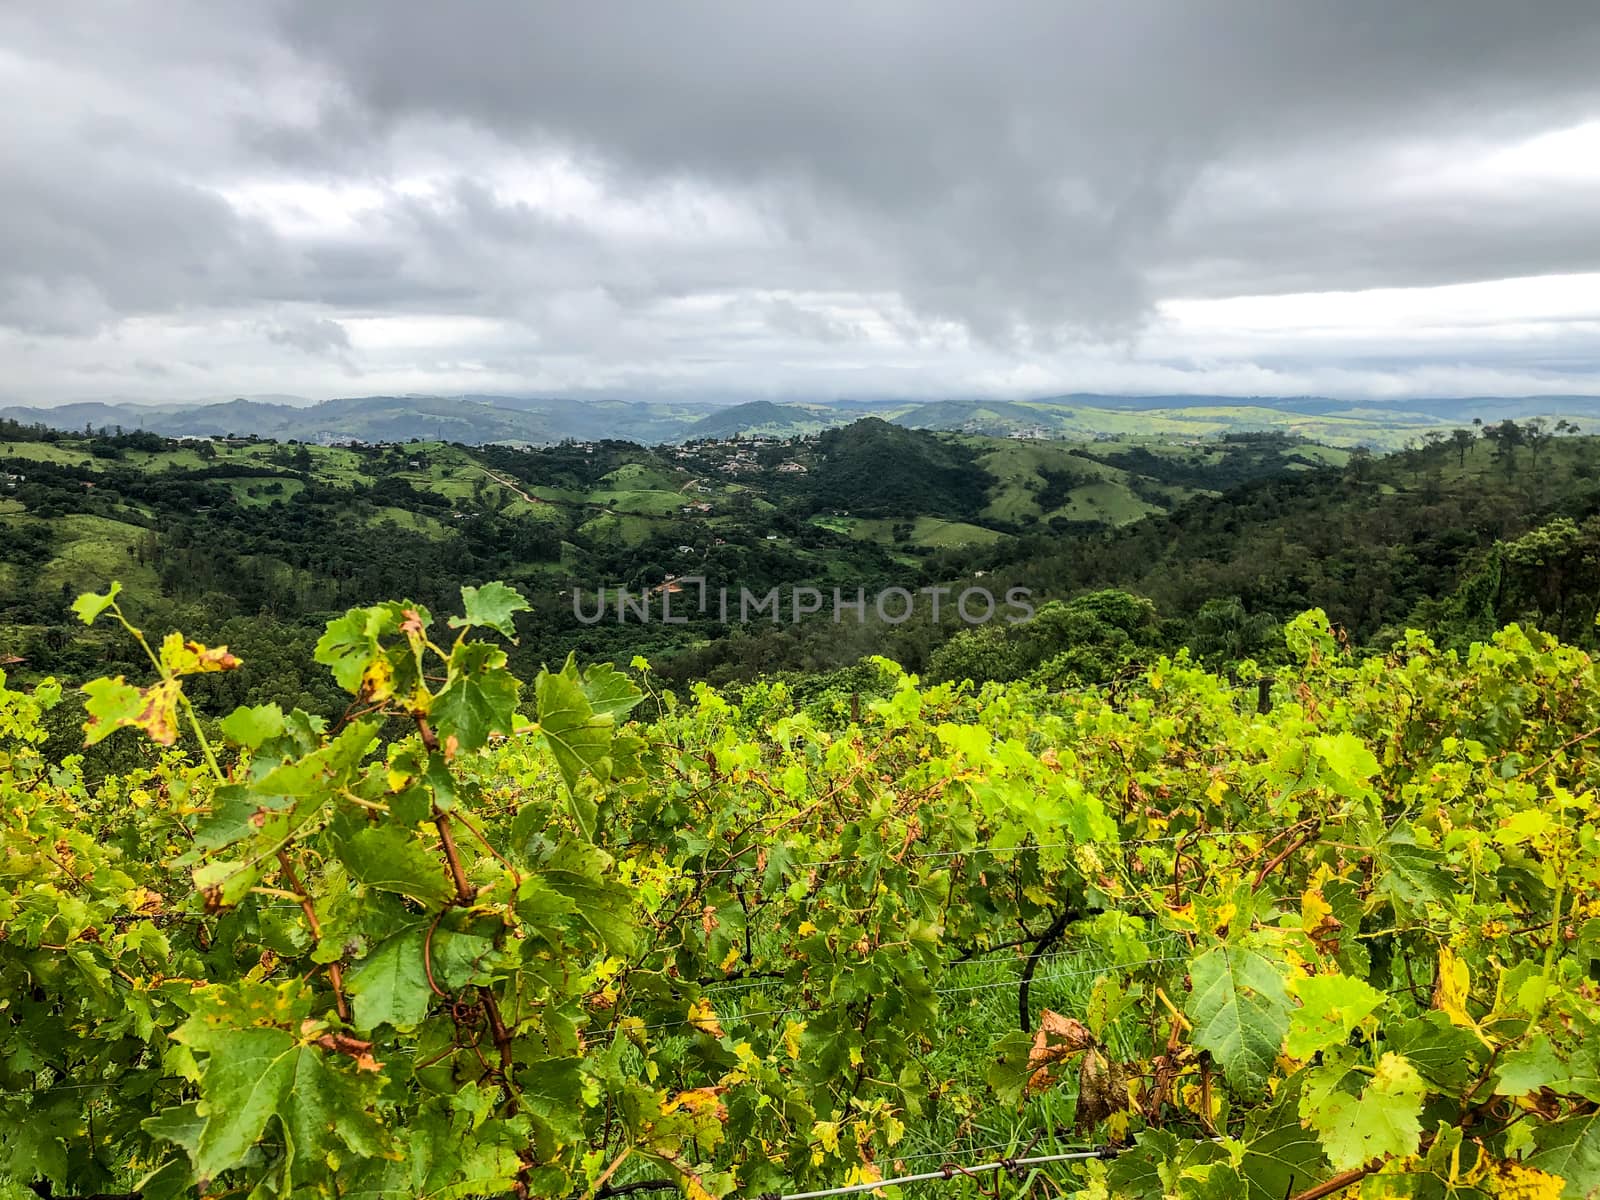 Vineyards in the mountain during cloudy raining season. Grapevines in the green hills. Vineyards for making wine grown in the valleys on rainy days and fog blowing through.